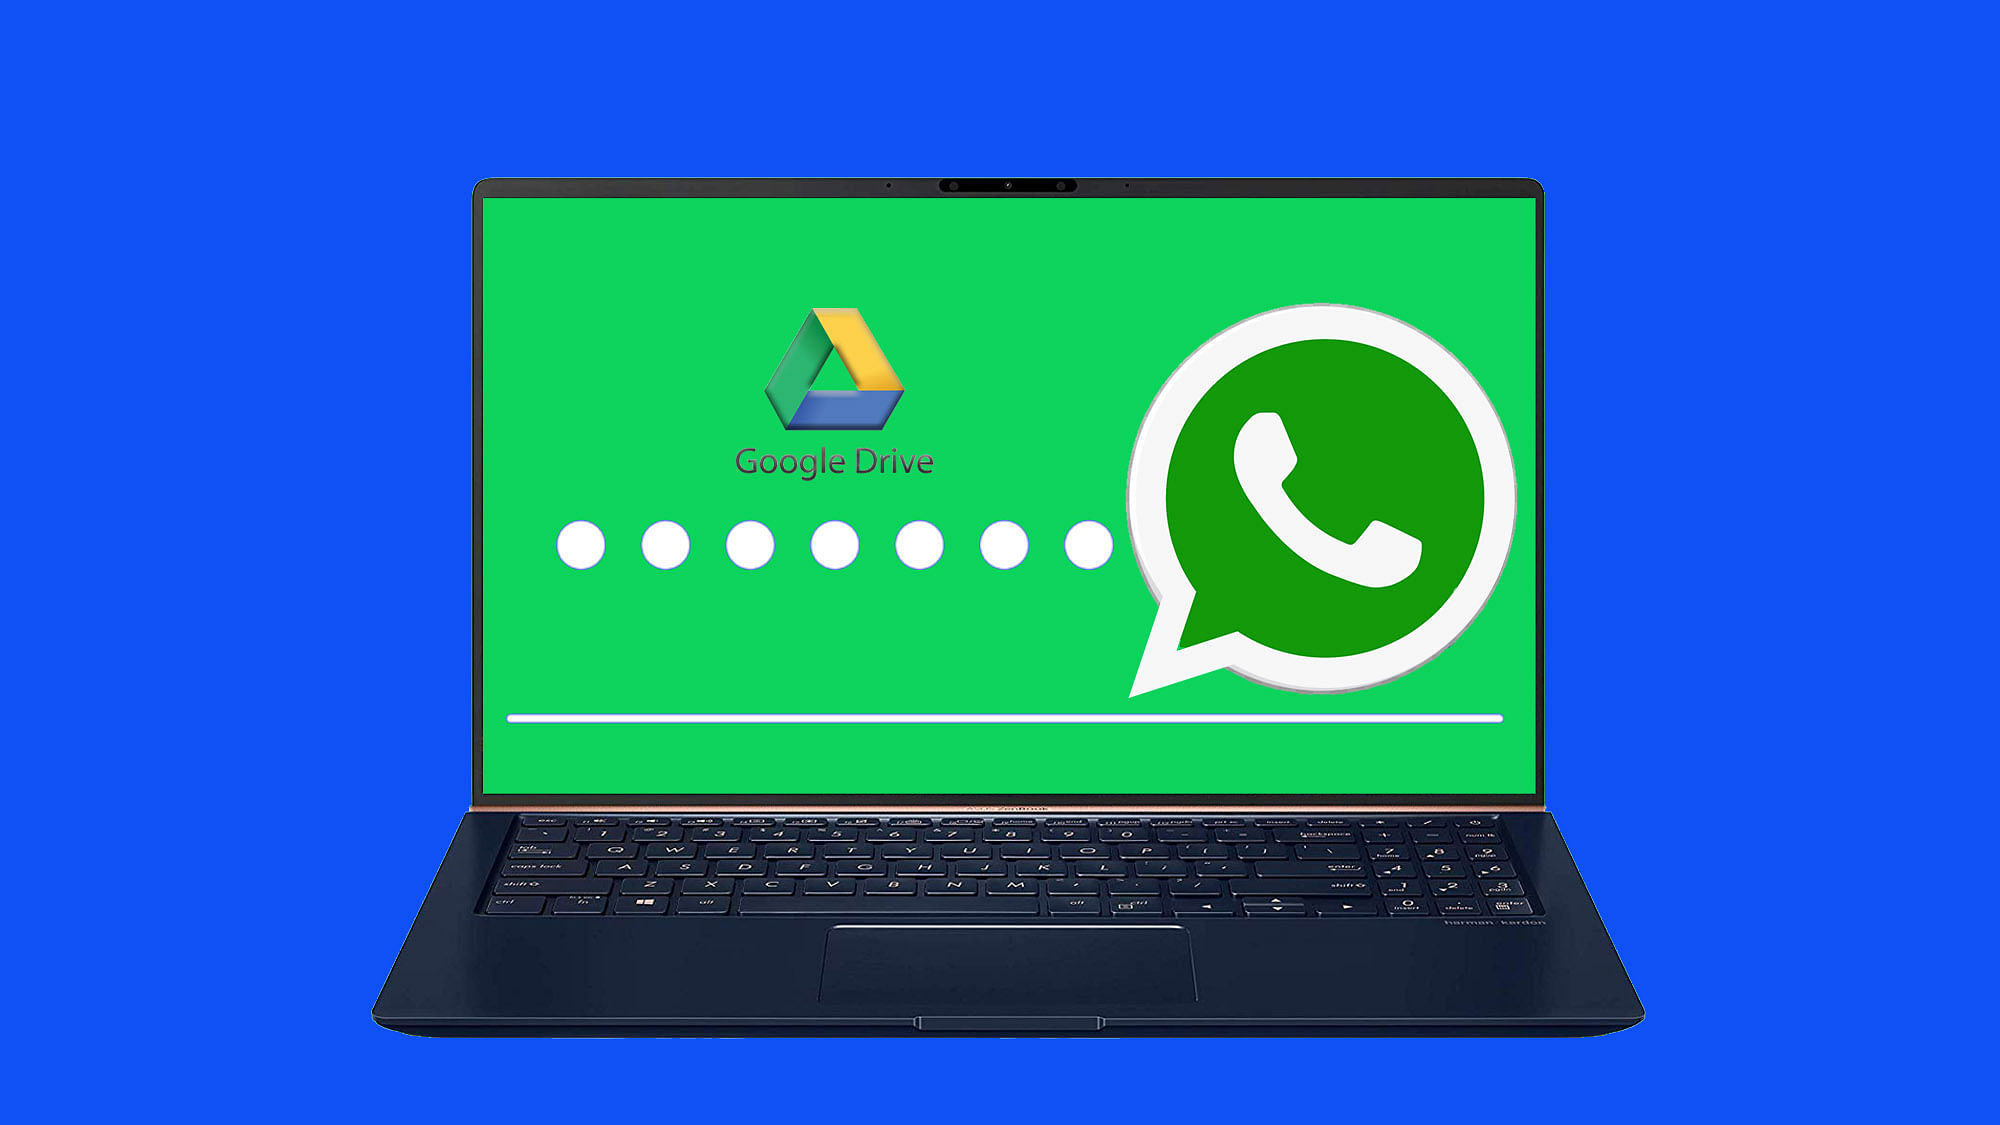 WhatsApp provides end-to-end encryption for security of chats, but not on the cloud.